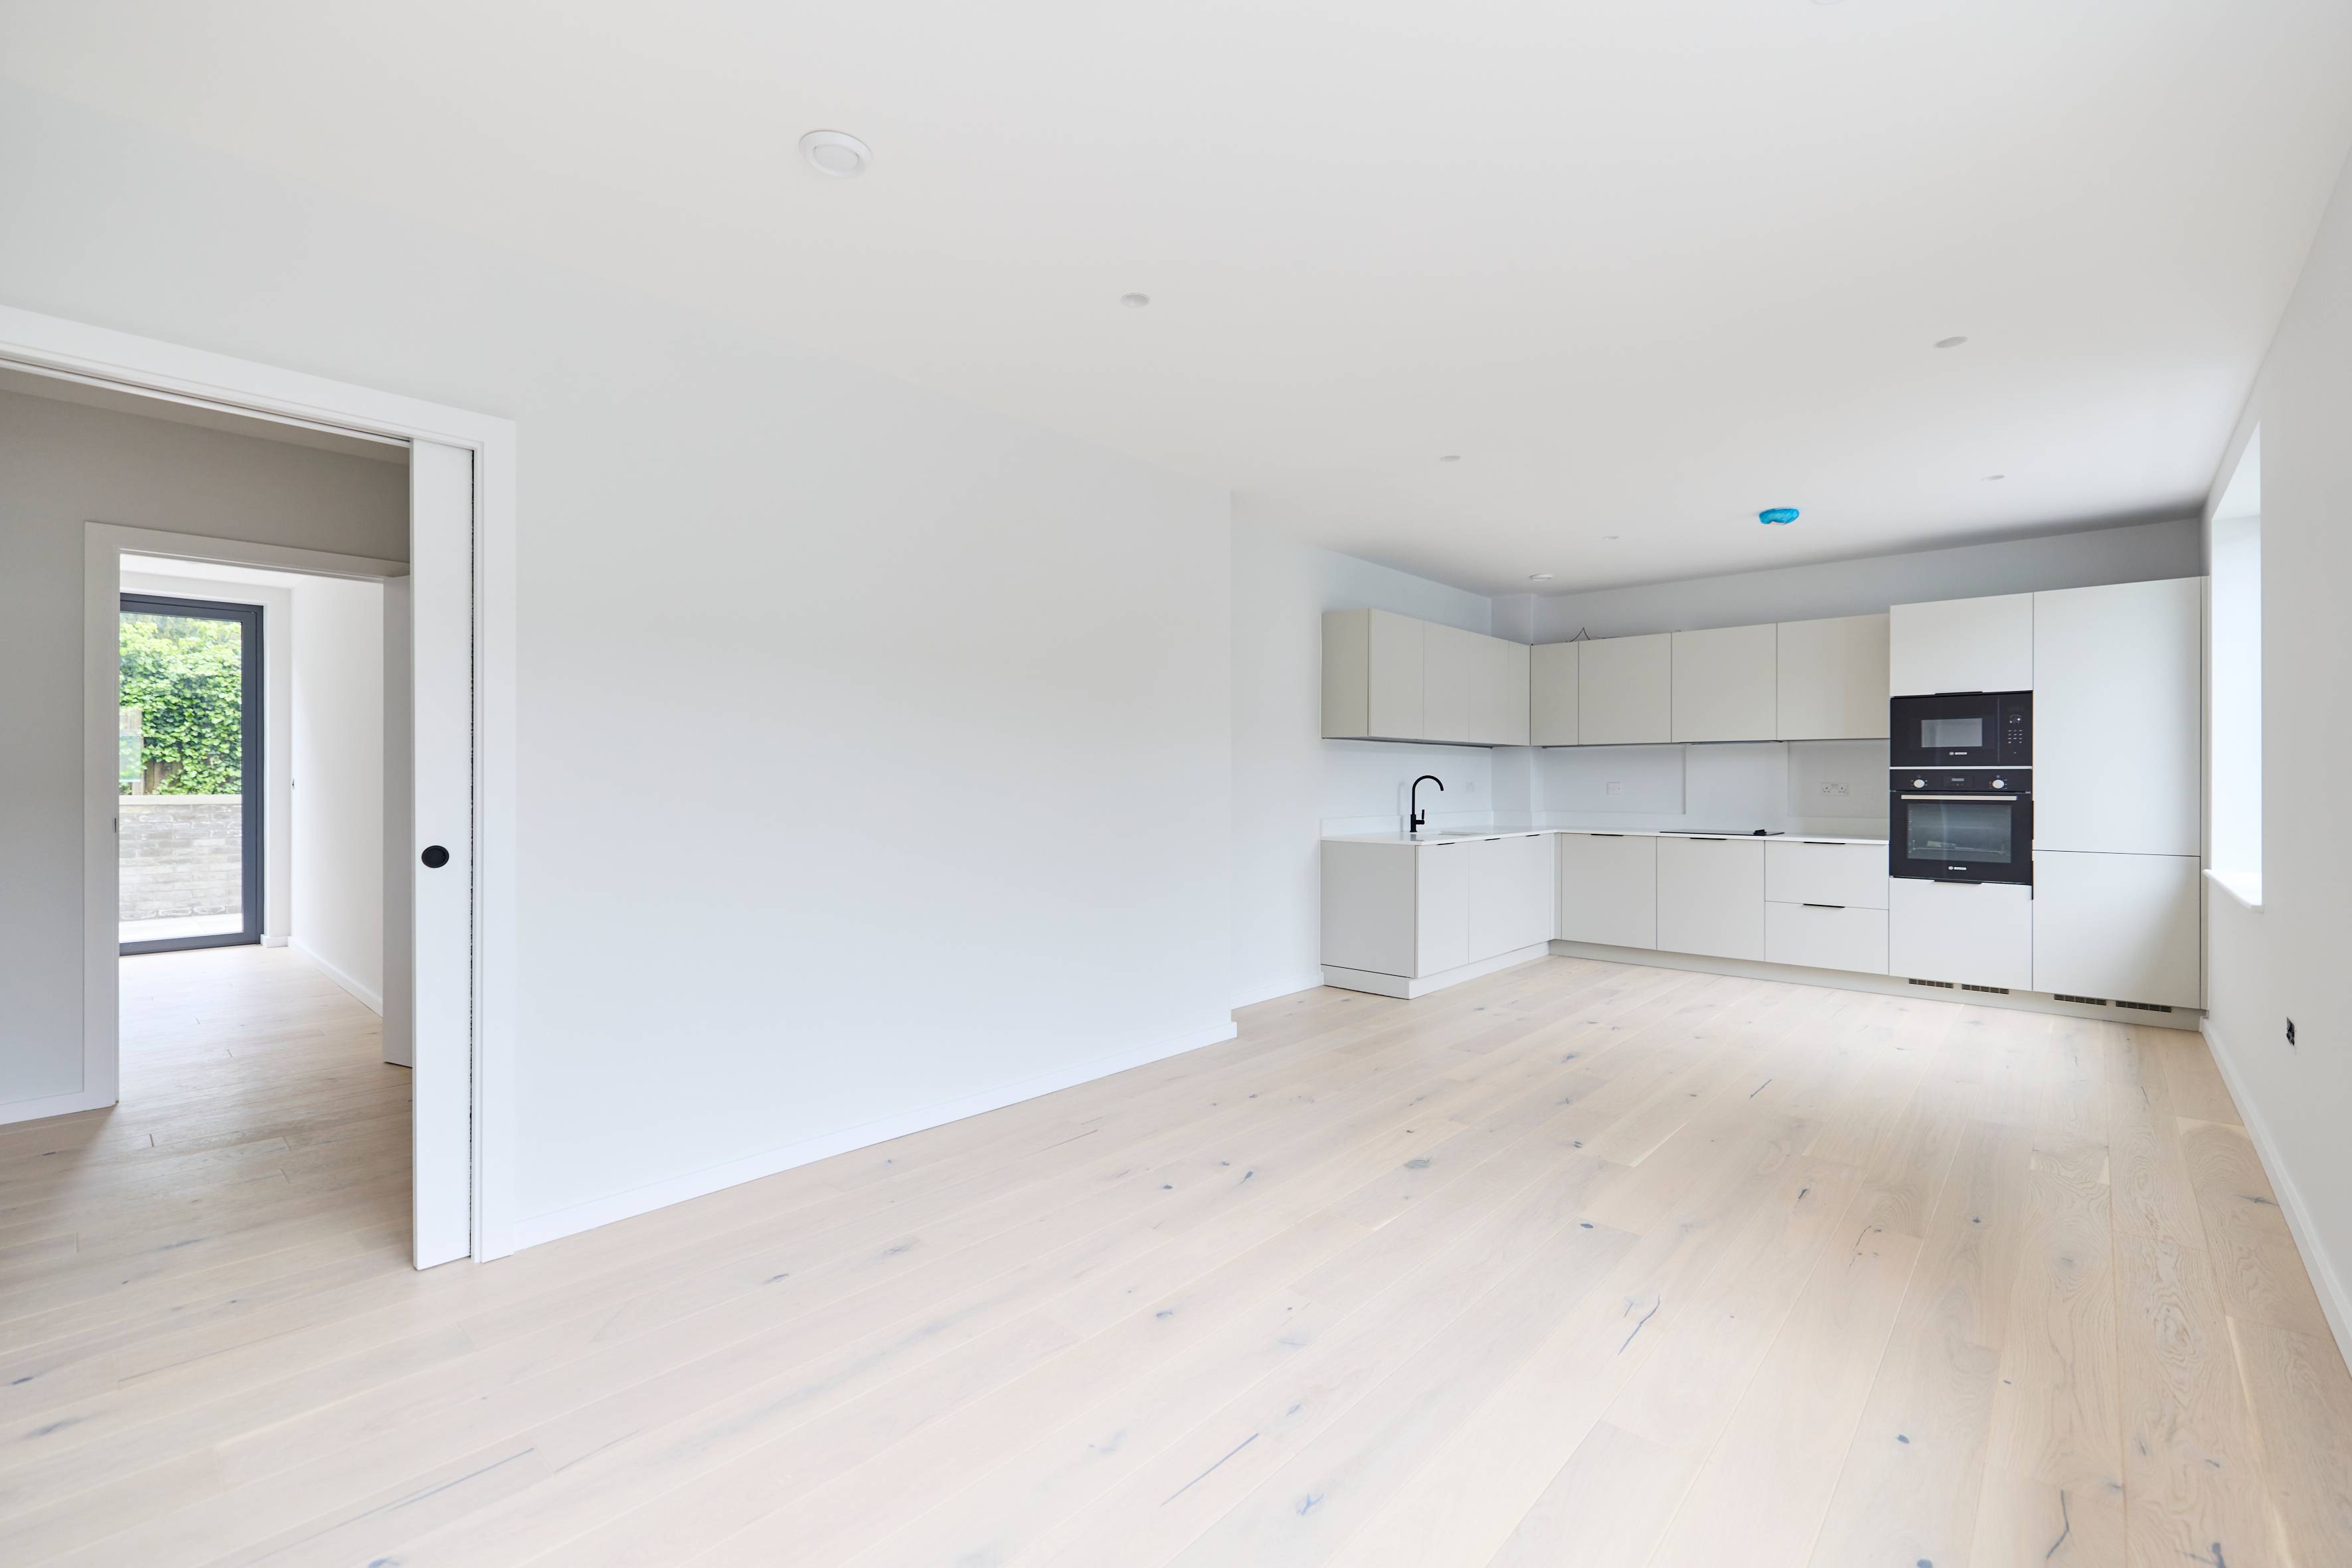 Spacious Two-Bedroom Apartment with Balcony in family-friendly North West London